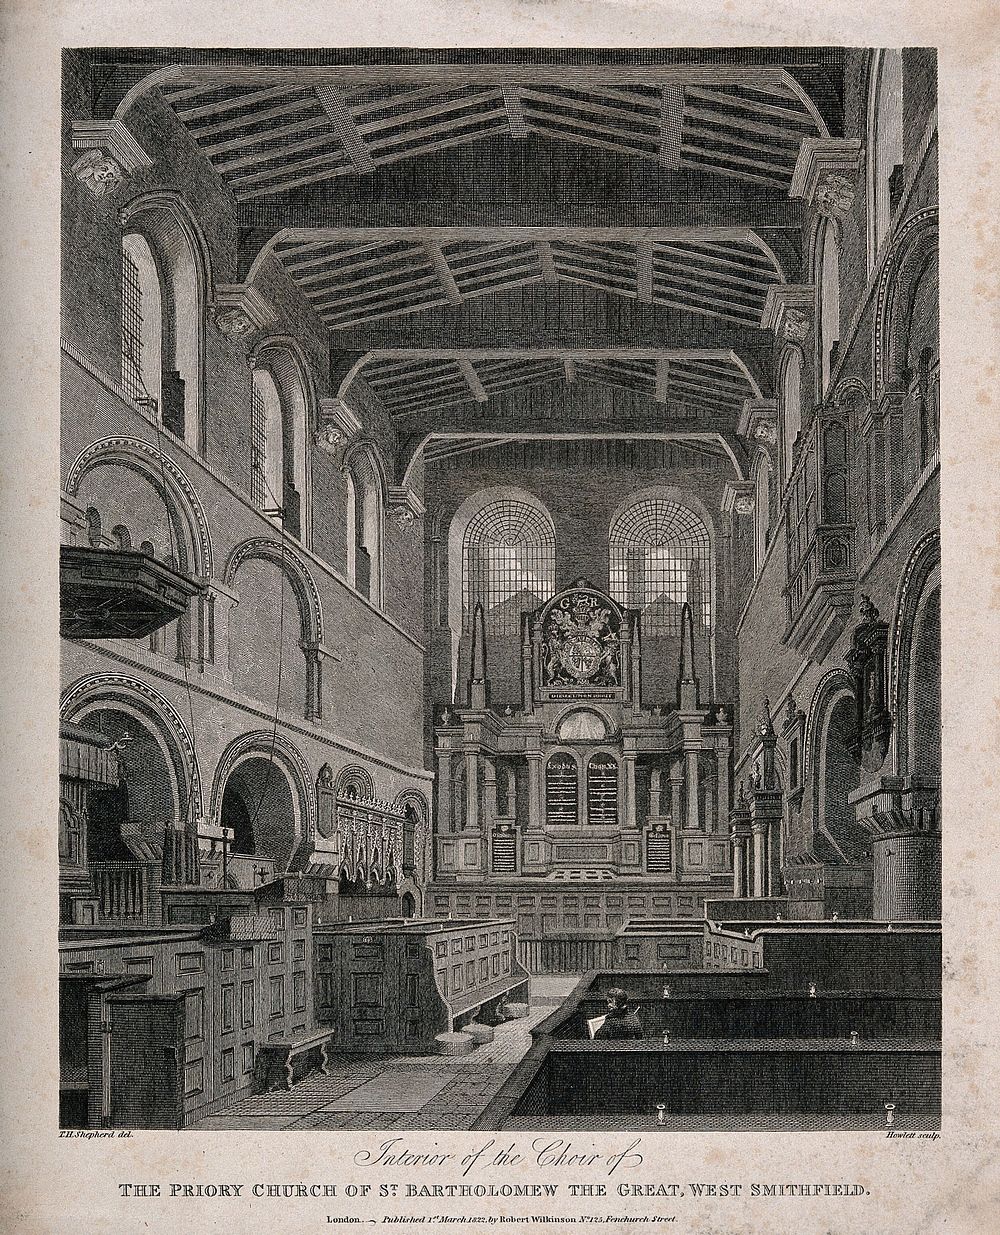 St Bartholomew's Priory, London: the interior looking towards the altar with the artist seated in a pew, drawing. Engraving…